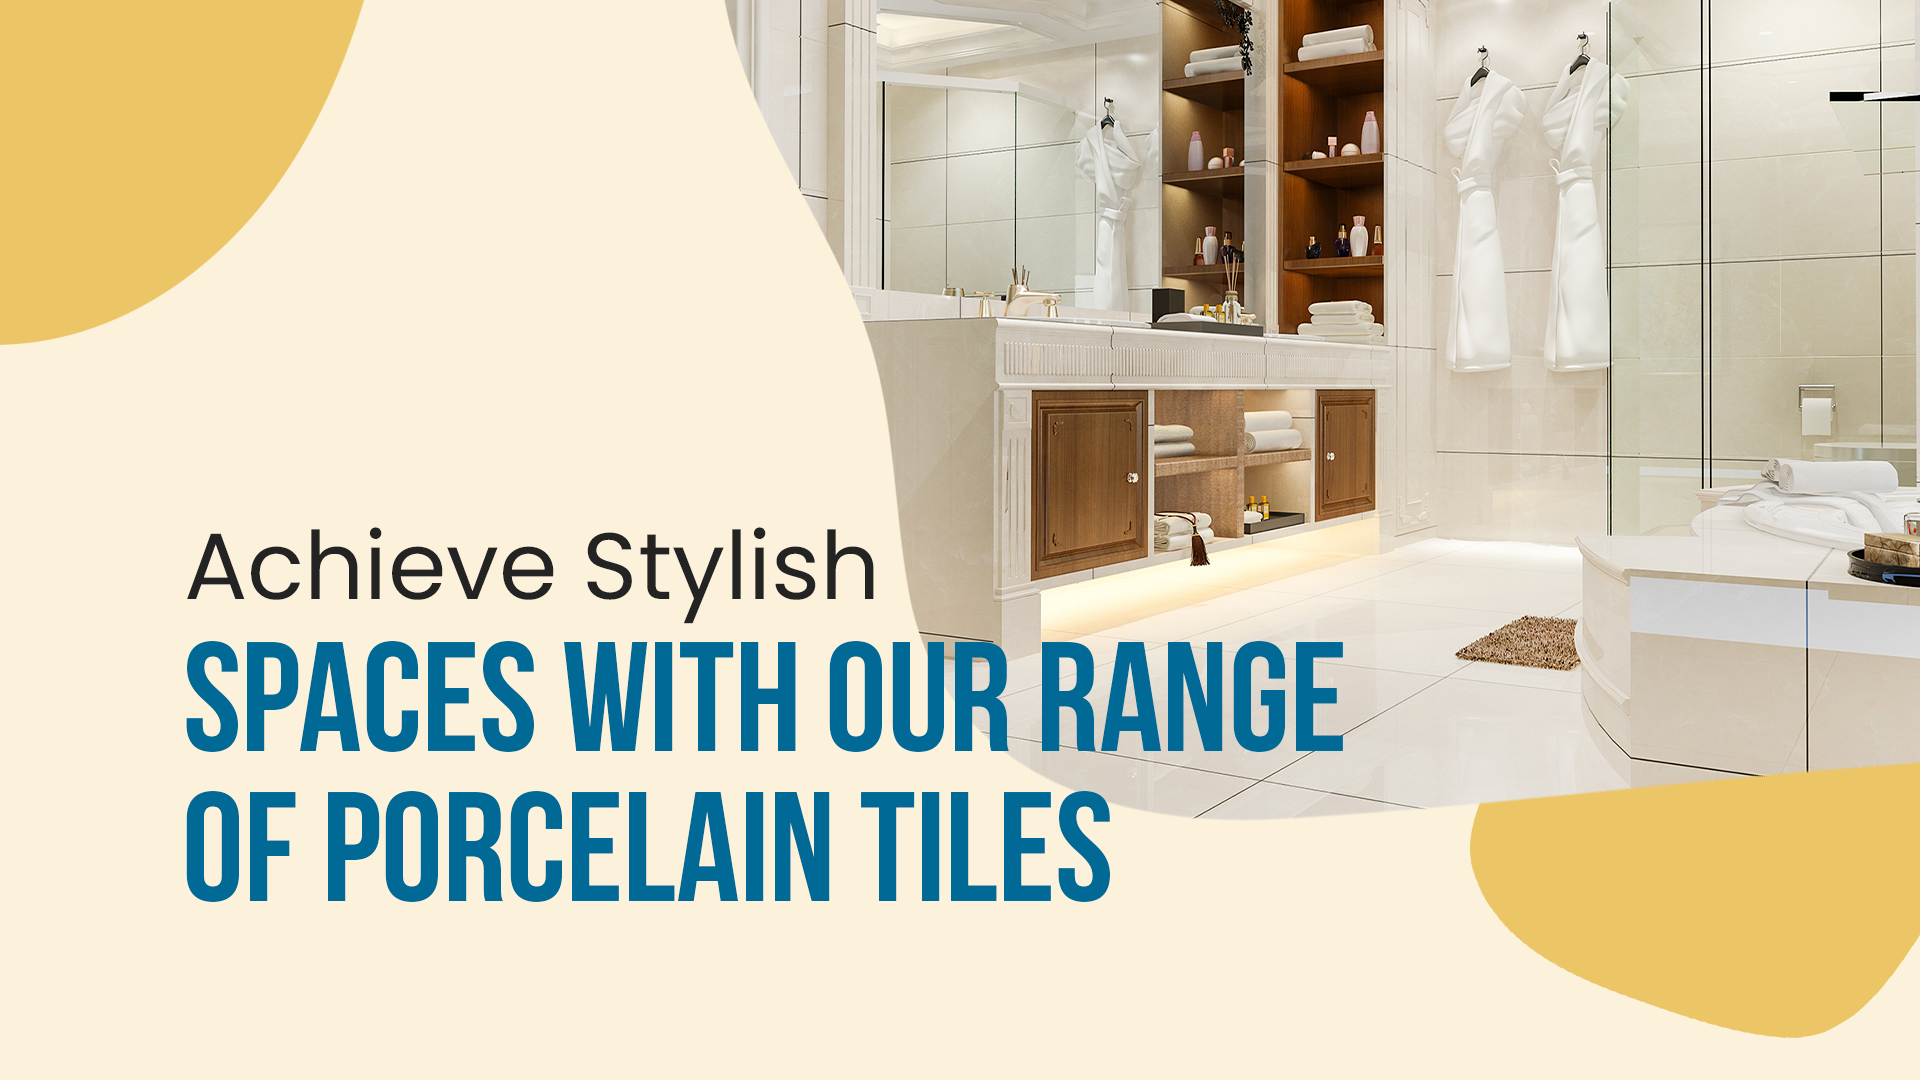 Achieve stylish spaces with our range of porcelain tiles